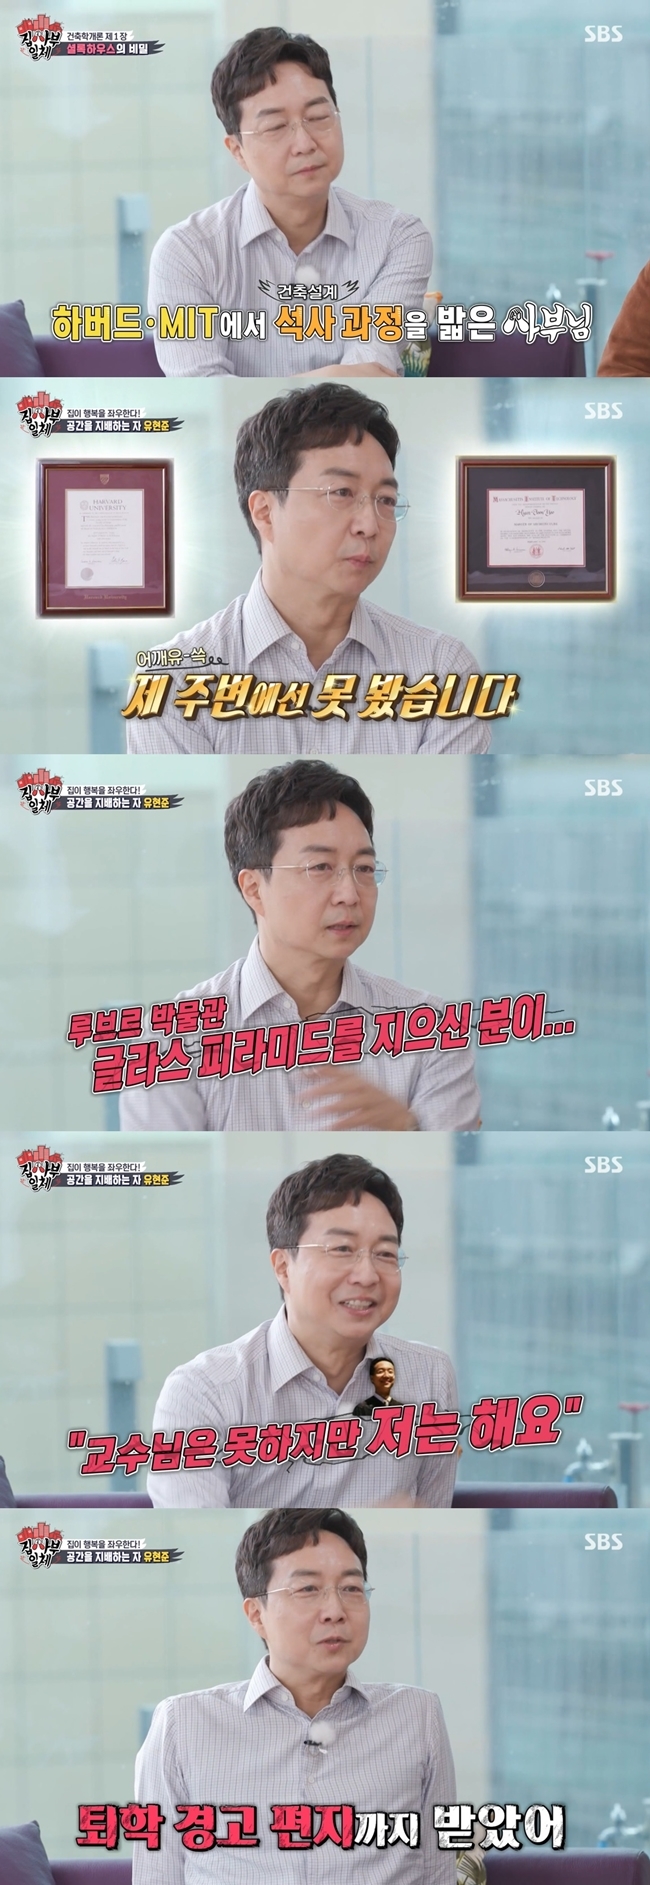 Yu hyun-jun architect reveals anecdote during school daysOn April 24, SBS All The Butlers, Kim Min-gyu appeared as a daily student and architect Yu hun-jun as a master.Yu hyun-jun Architect took a masters degree in architectural design at Harvard Business School University, MIT.I thought it was one thing short, yu hyun-jun said, explaining why he attended both universities.When Kim Dong-Hyun asked, Do you ever leave two schools? Yu hun-jun said, I have not seen them around me. Some people have come out of one place and went to graduate school.Some of the people who went to Harvard Business School graduate school after leaving the MIT department built the Louvre Museum Glass pyramid. Lee Seung-gi said, If you look at foreign magazines, there is a typical university image of red bricks. Yu hun-jun said, Architecture college buildings are not.The first grade is the first floor, the second grade is the second floor. The difference is that they all look at each other.It is good to be competing with other students while watching and learning. The architecture department is good because it doesnt have an answer. Ive been fighting with you since first grade.Later, I even received a letter warning me of expulsion, she laughed.